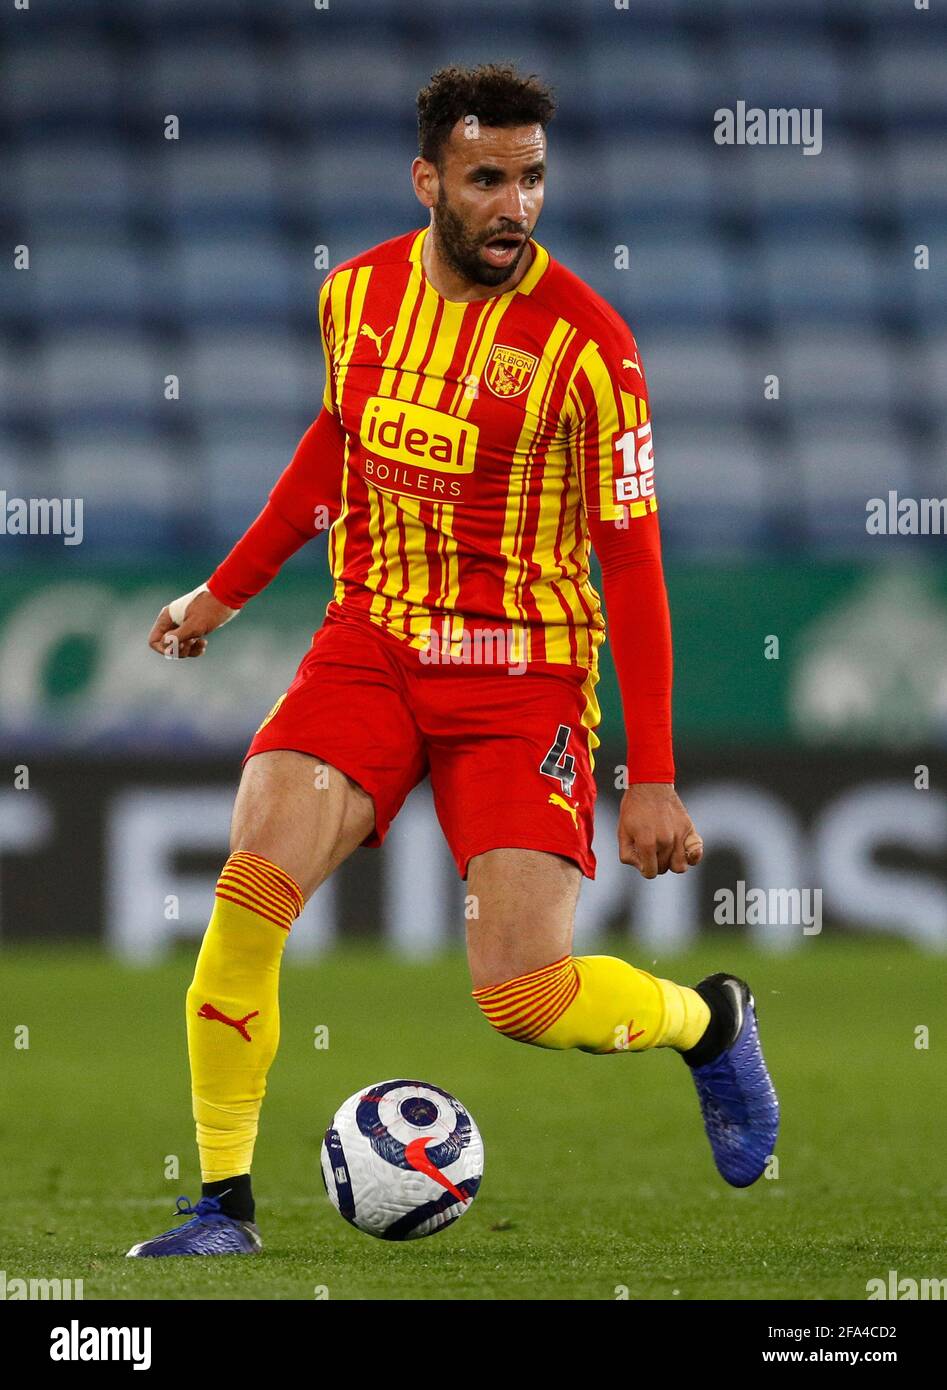 Leicester, UK. 22nd Apr, 2021. Hal Robson-Kanu of West Bromwich Albion during the Premier League match at the King Power Stadium, Leicester. Picture credit should read: Darren Staples/Sportimage Credit: Sportimage/Alamy Live News Stock Photo